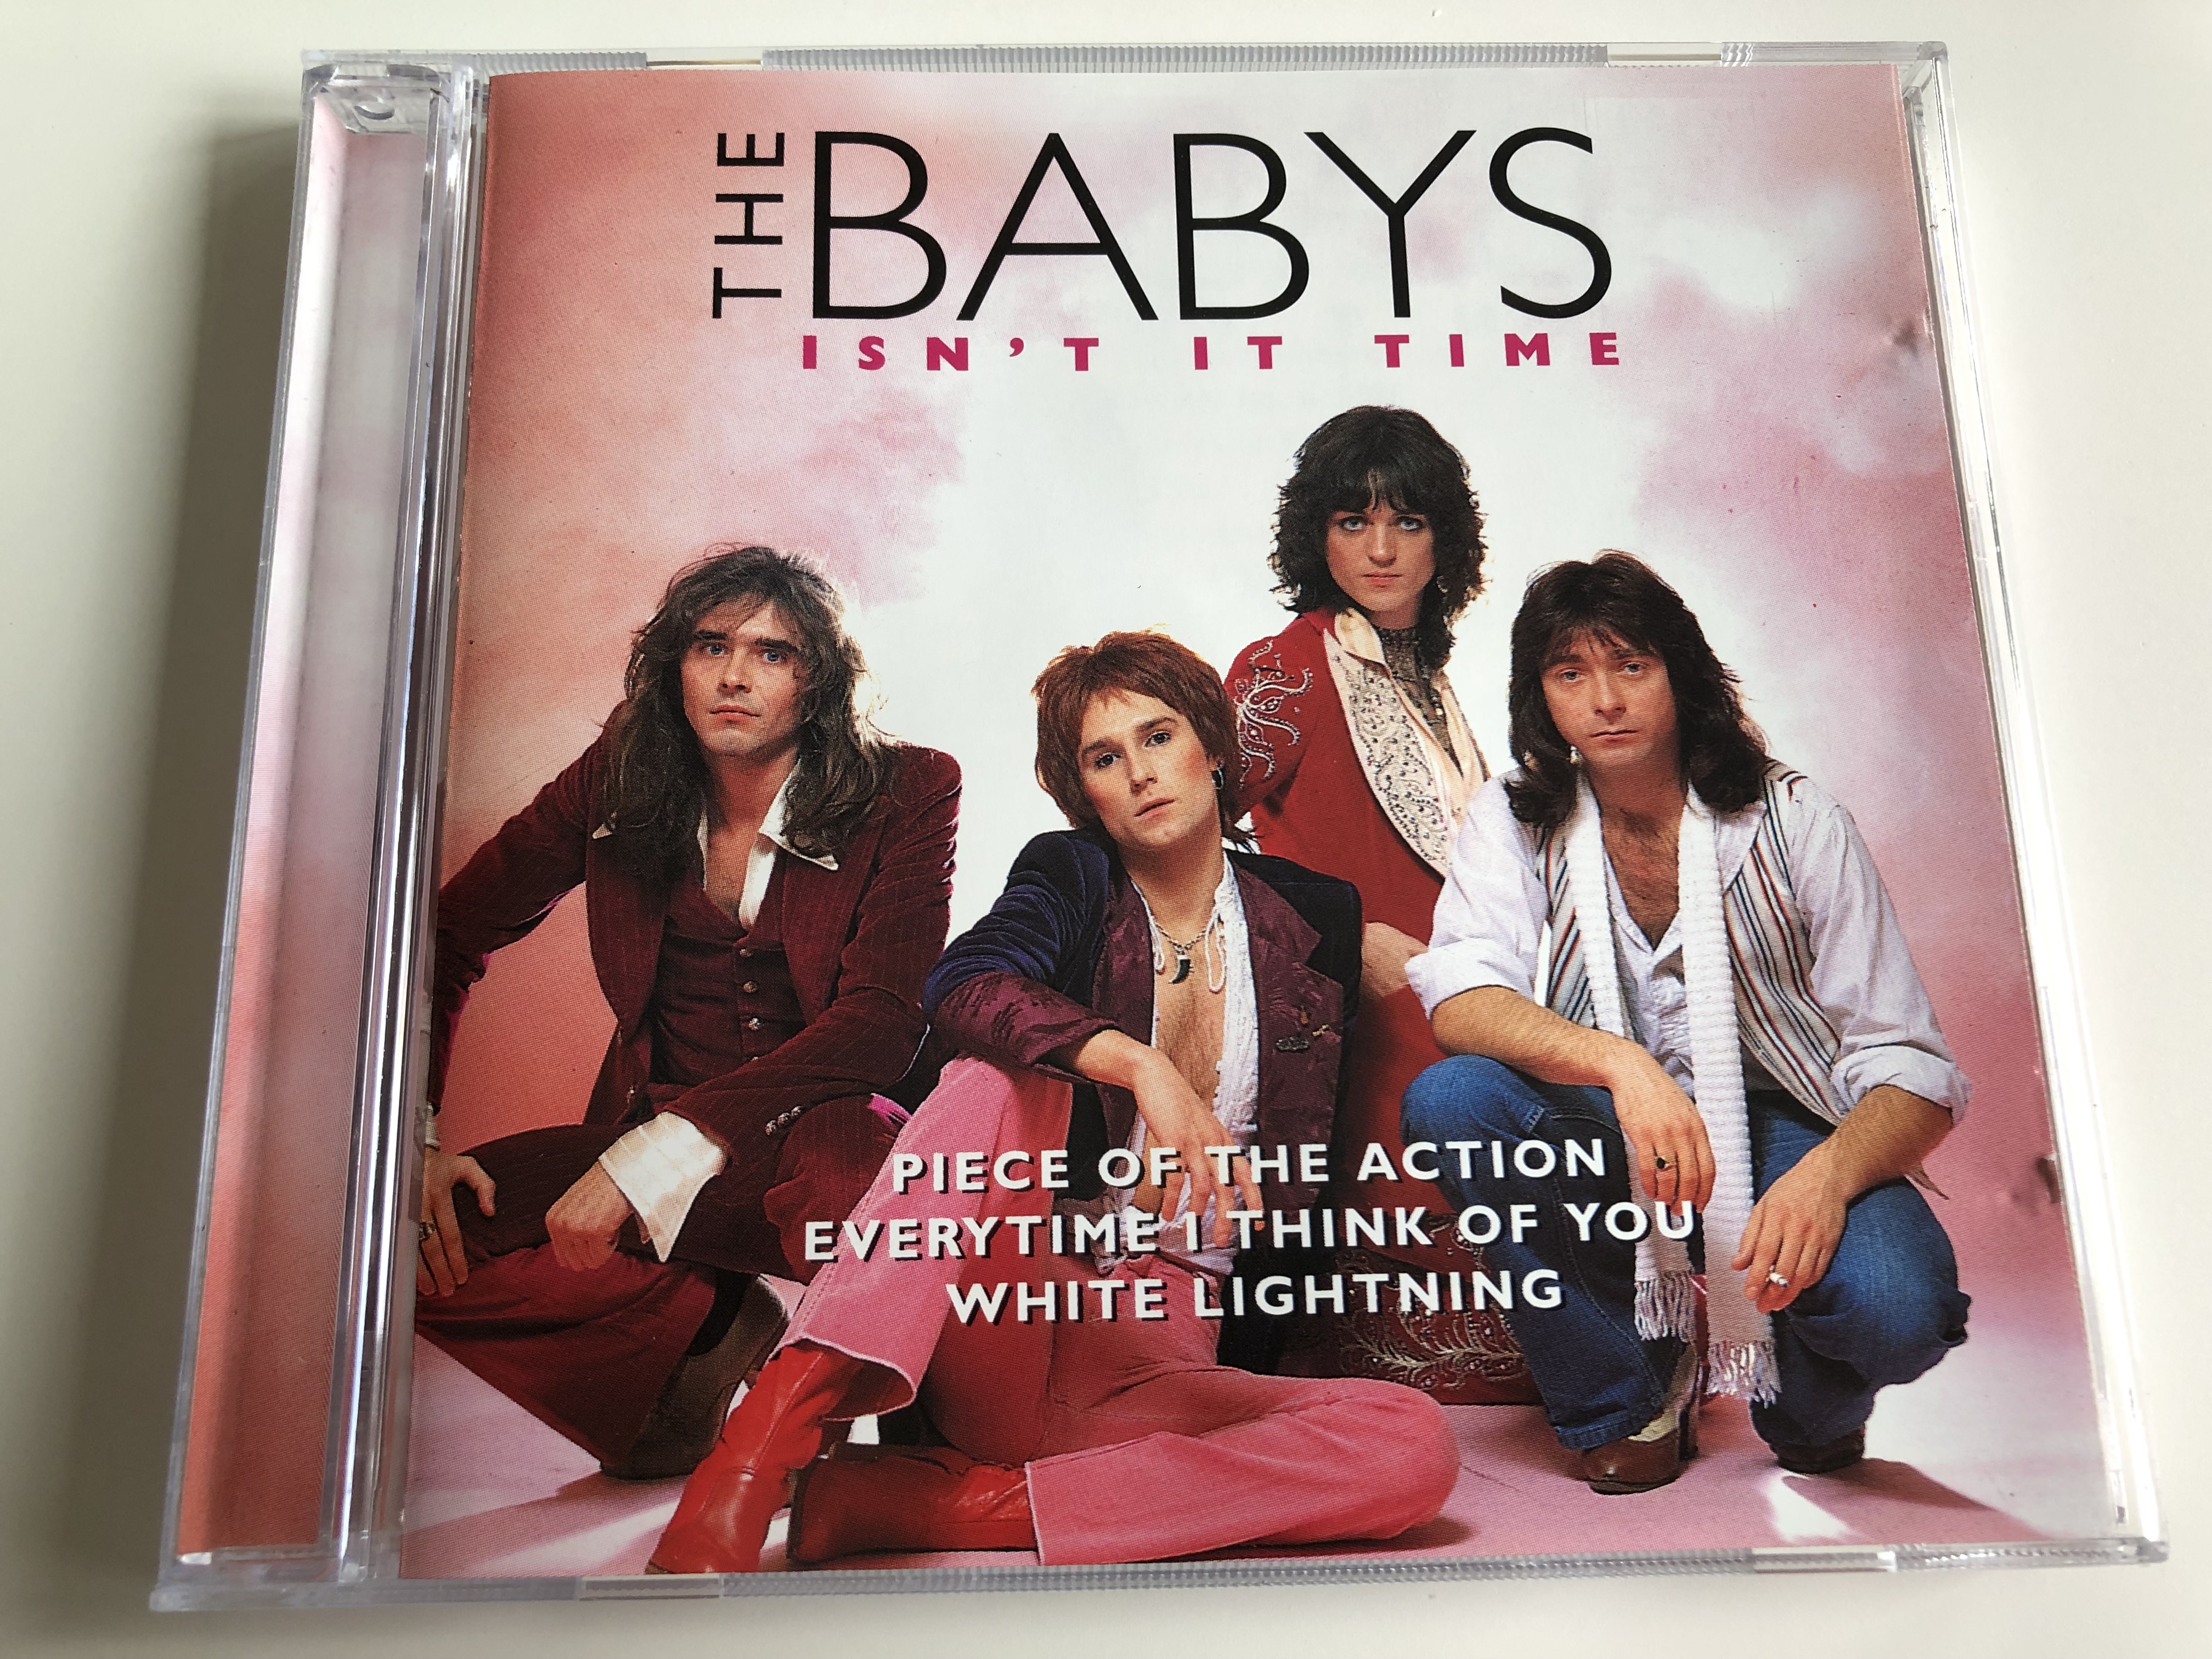 the-babys-isn-t-it-time-piece-of-the-action-everytime-i-think-of-you-white-lightning-disky-audio-cd-1997-dc-881882-1-.jpg